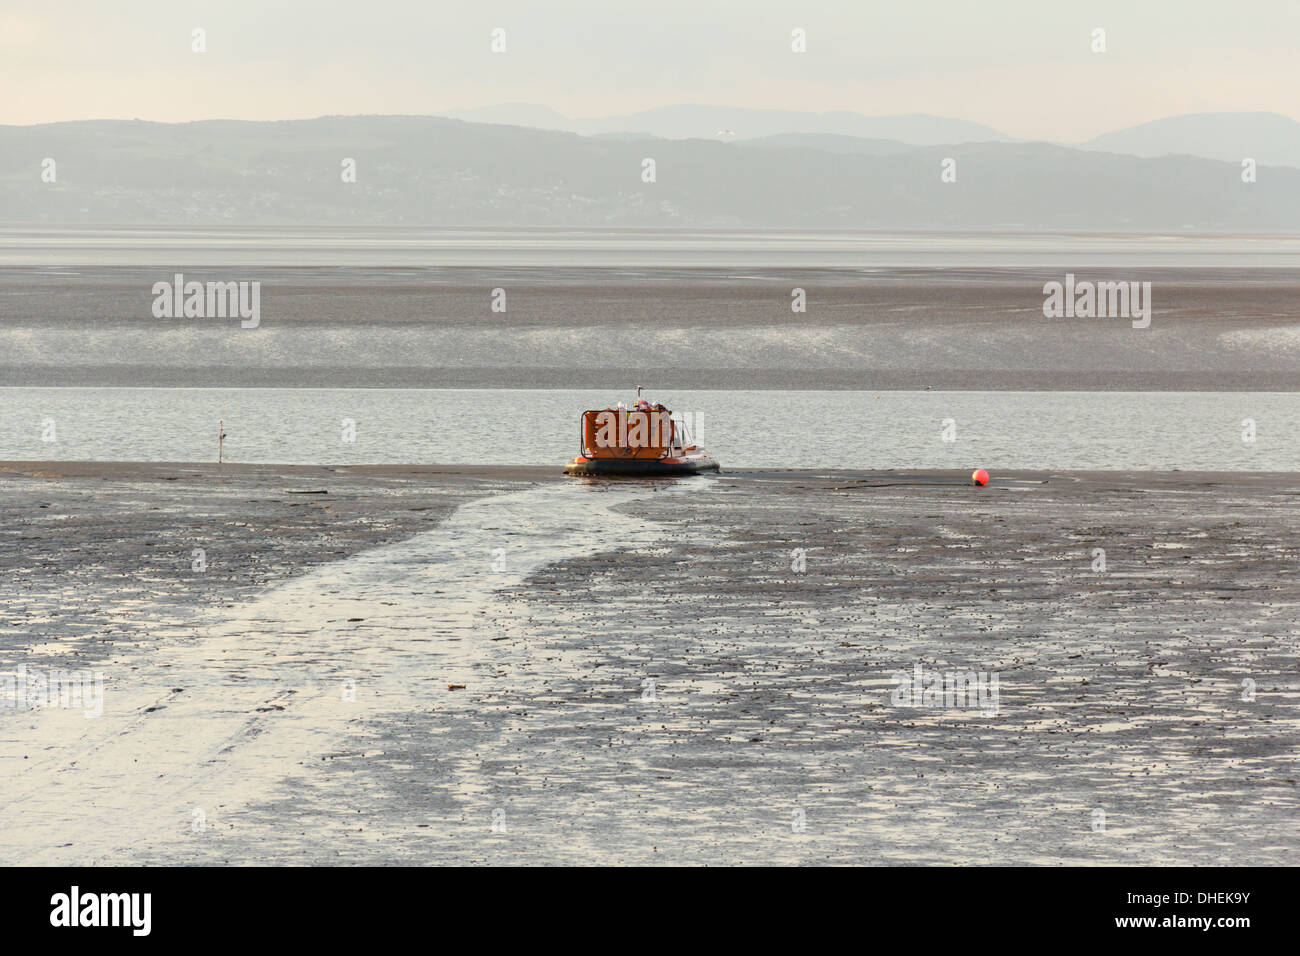 The Royal National Lifeboat Institution (RNLI) hovercraft of Morecambe Bay in an early evening practice session. Stock Photo